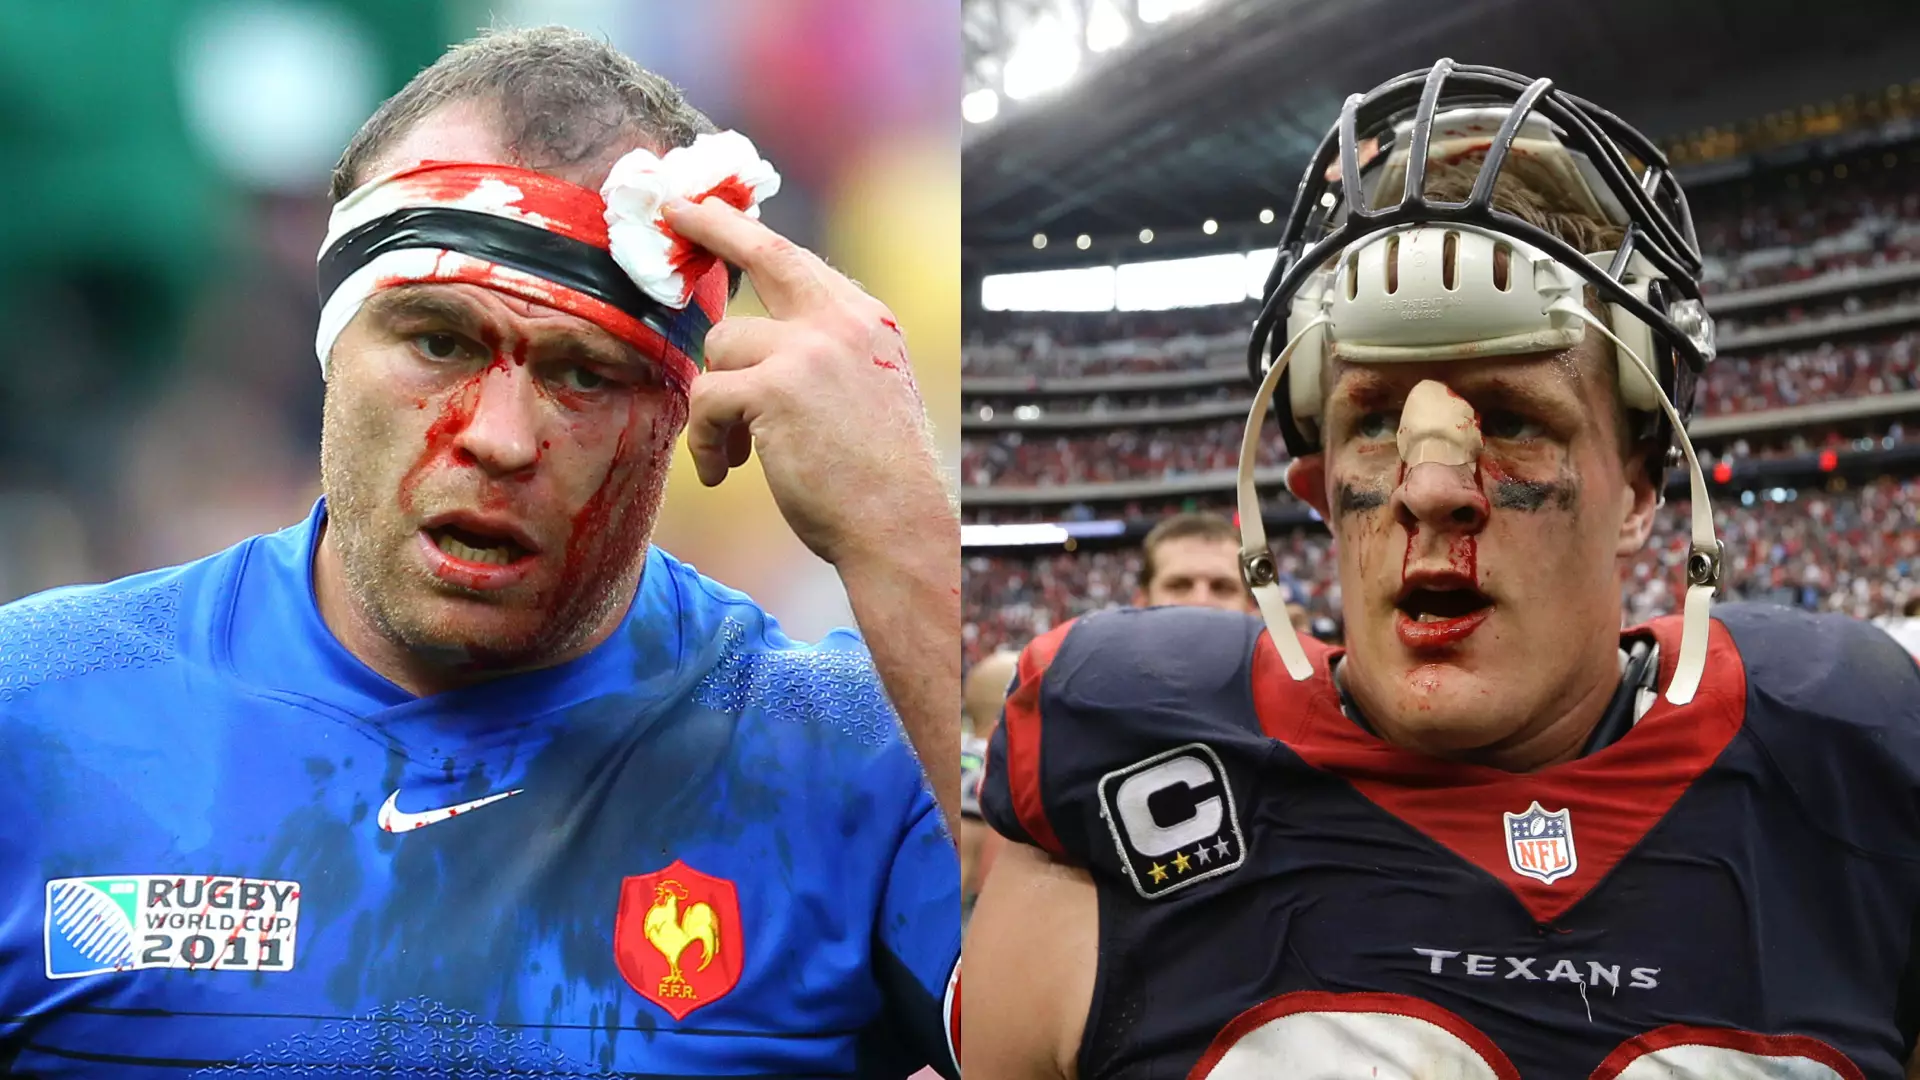 Rugby vs American Football: NFL Stars Put Their Knowledge To The Test